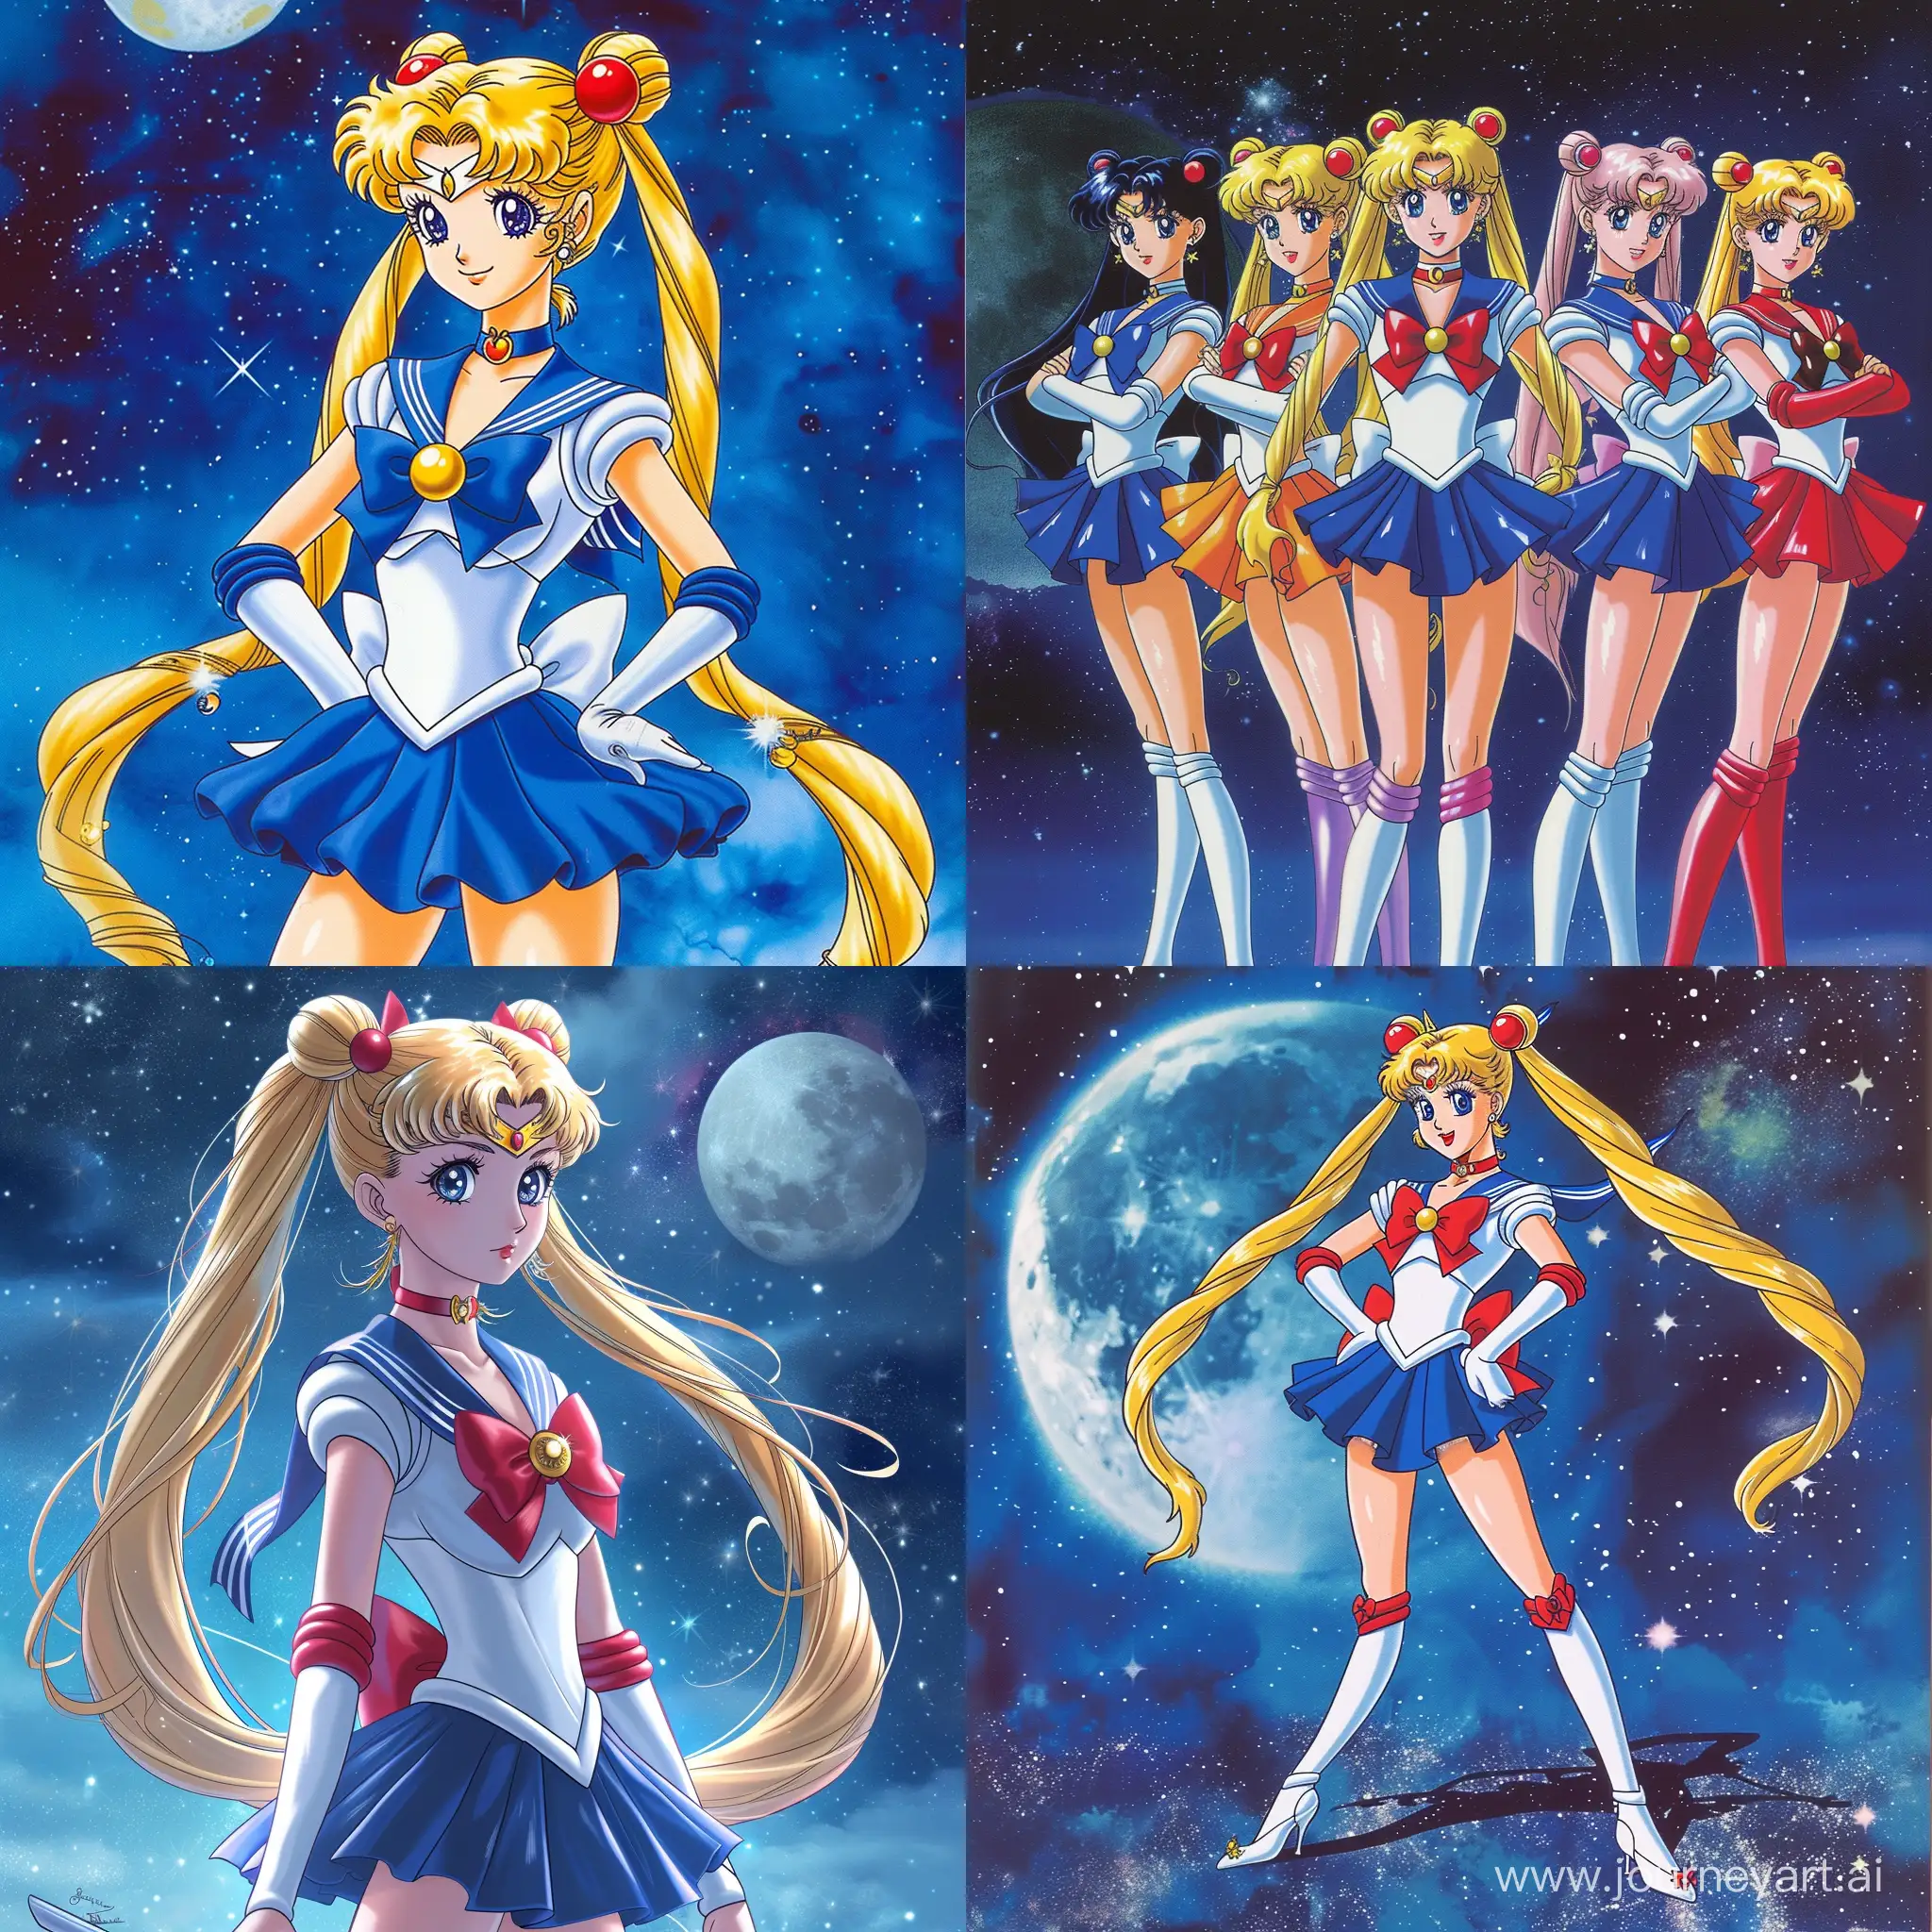 Sailor-Moon-Artwork-with-Version-6-Aspect-Ratio-11-Scene-Number-55668